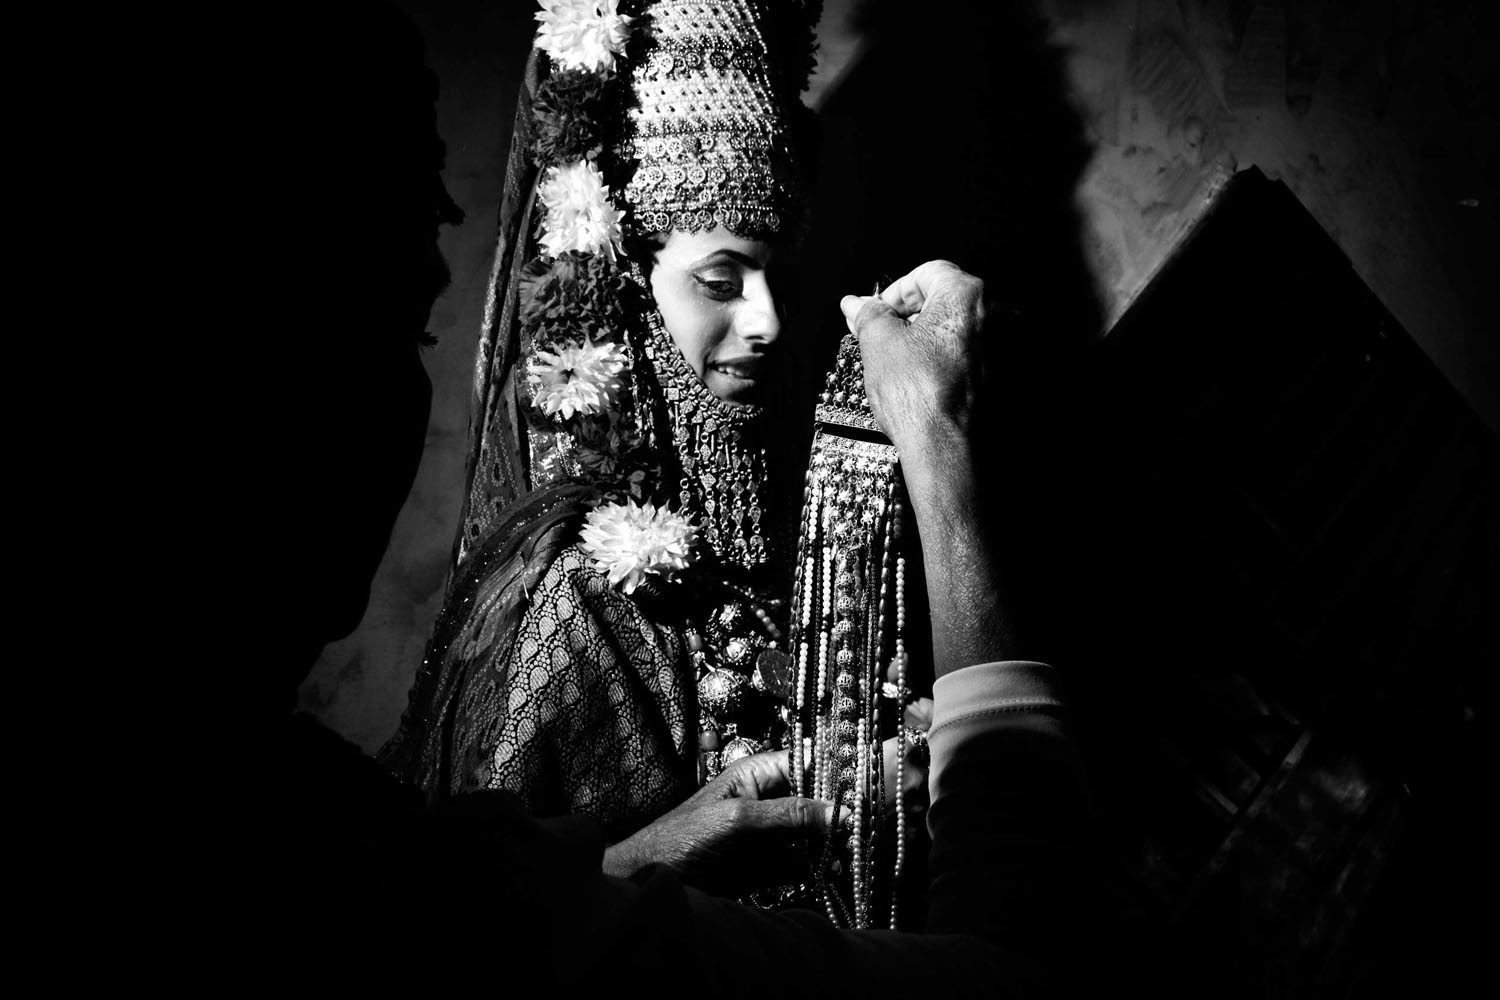 TIME LightBox: The Daughters of the KingThe henna is a pre-nuptial ceremony celebrated in Moroccan or Yemenite families where the soon-to-be bride is dressed-up as a Queen with flowers and jewels and she is inivited to dance with her girl friends to say good-bye to celibacy and life as a single young girl. Meah Shearim, Jerusalem, July 2012.